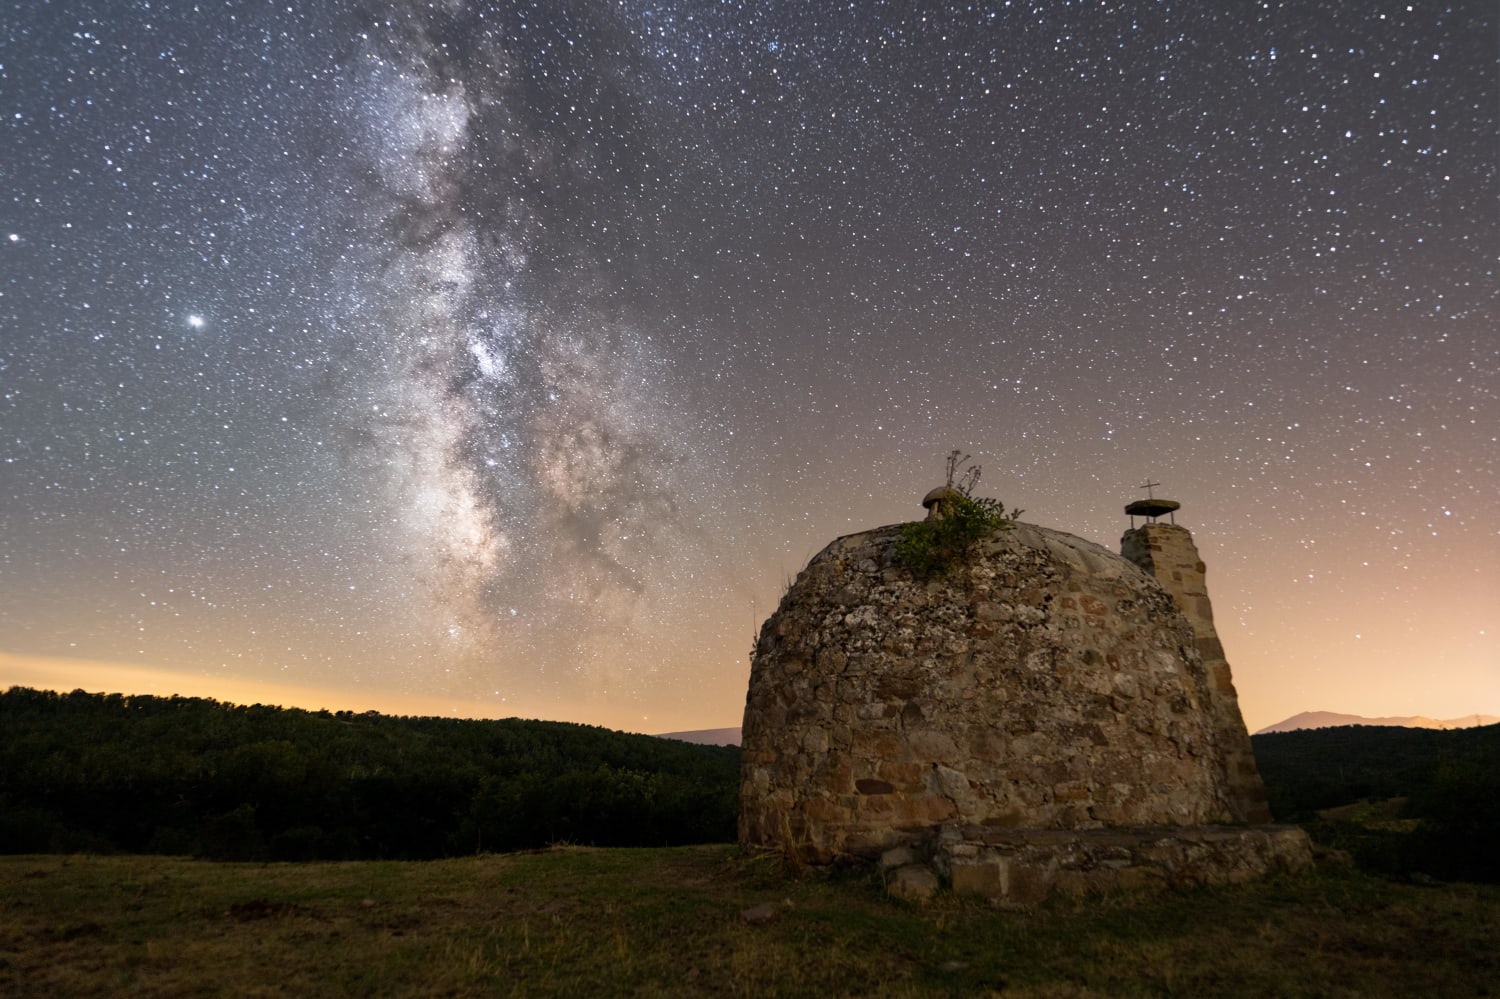 Milky Way shot over “la choza", a 19th century shelter used by ranchers to shelter at night and during storms. Mudá, Palencia (Spain)